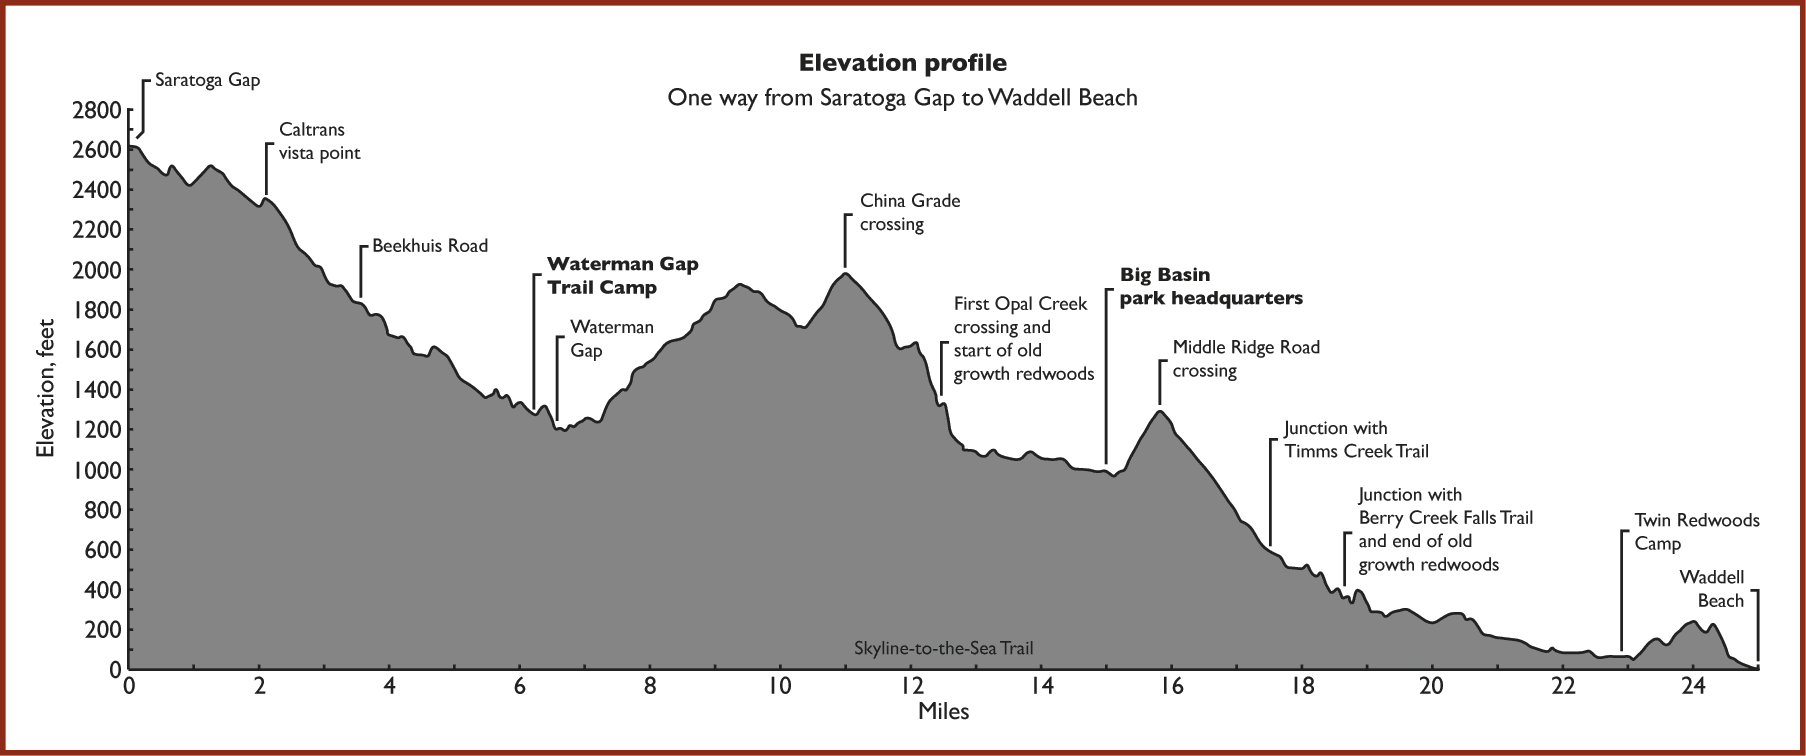 Elevation profile of the the Skyline-to-the-Sea Trail